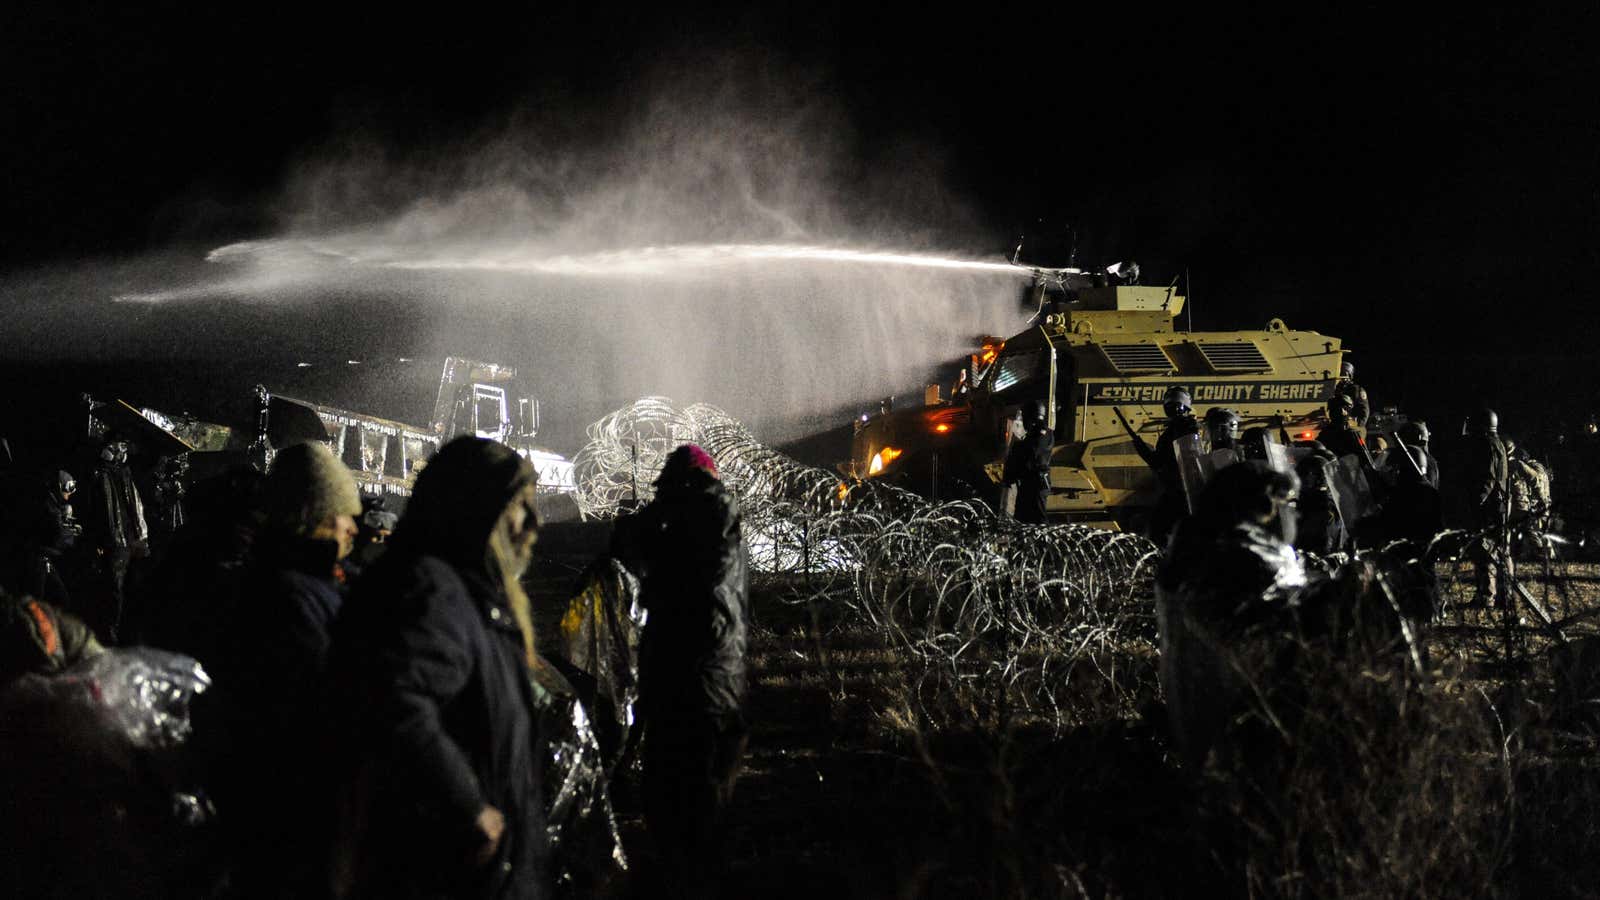 Those seeking to protect their water were attacked by law enforcement with water.